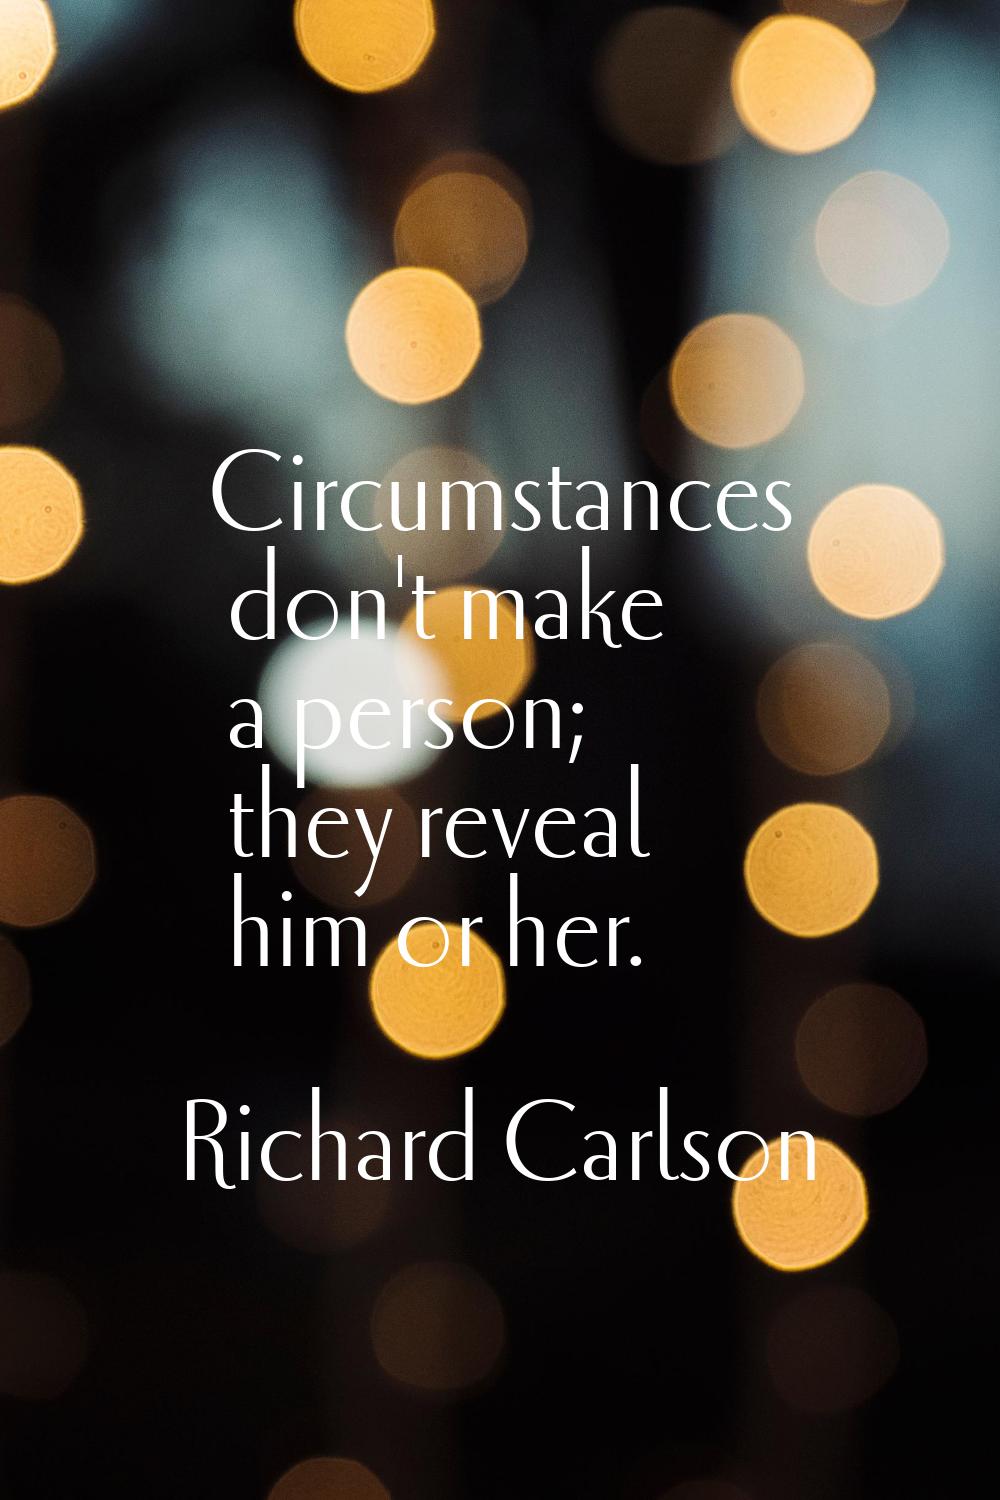 Circumstances don't make a person; they reveal him or her.